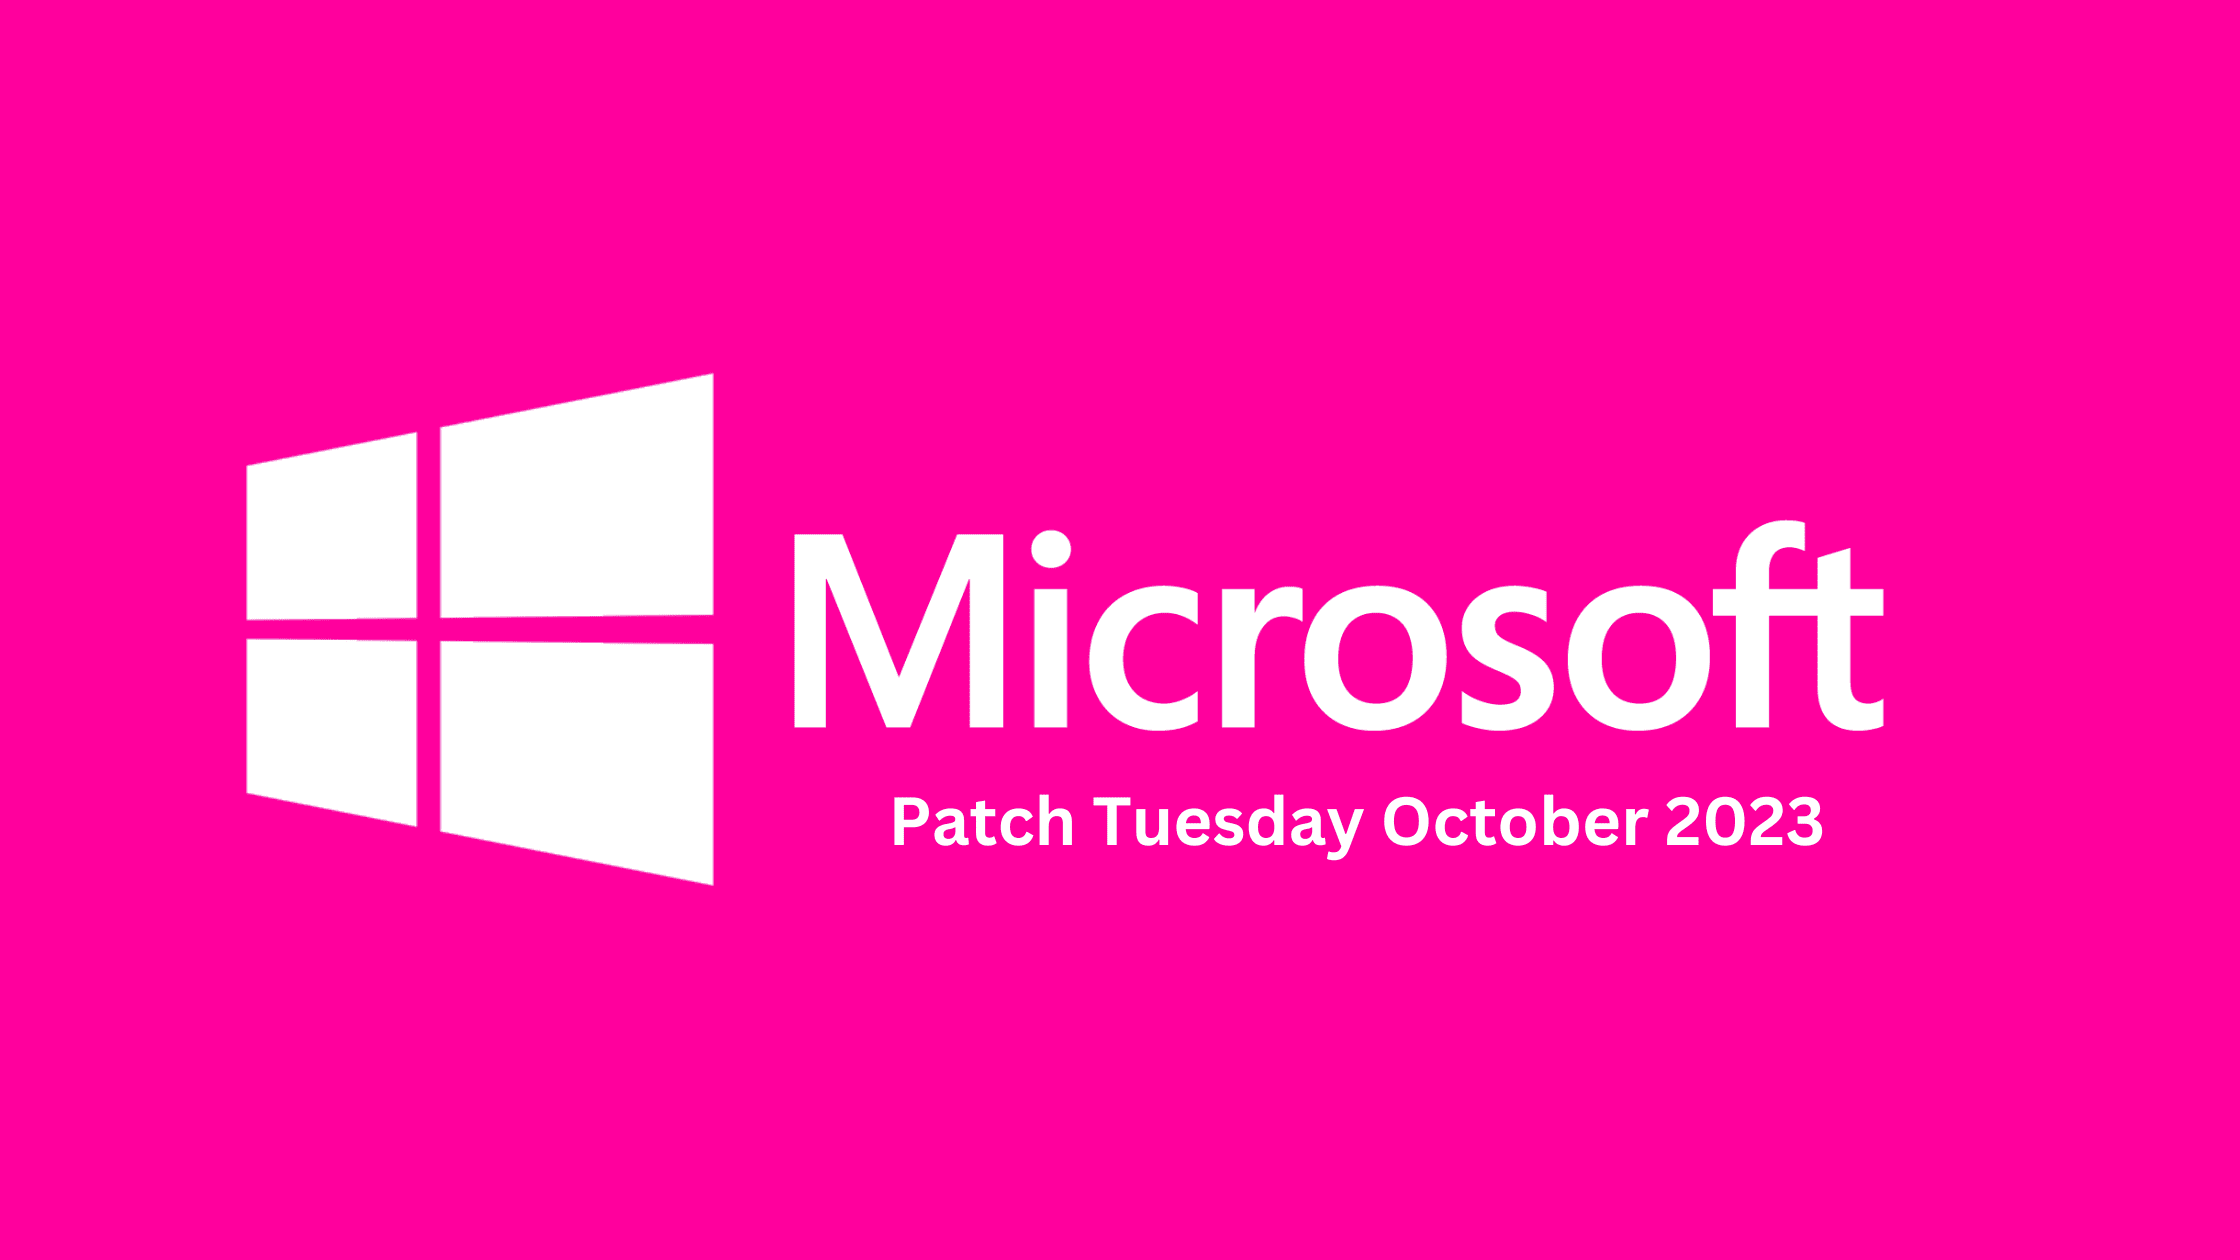 Breaking Down The Latest October 2023 Patch Tuesday Report